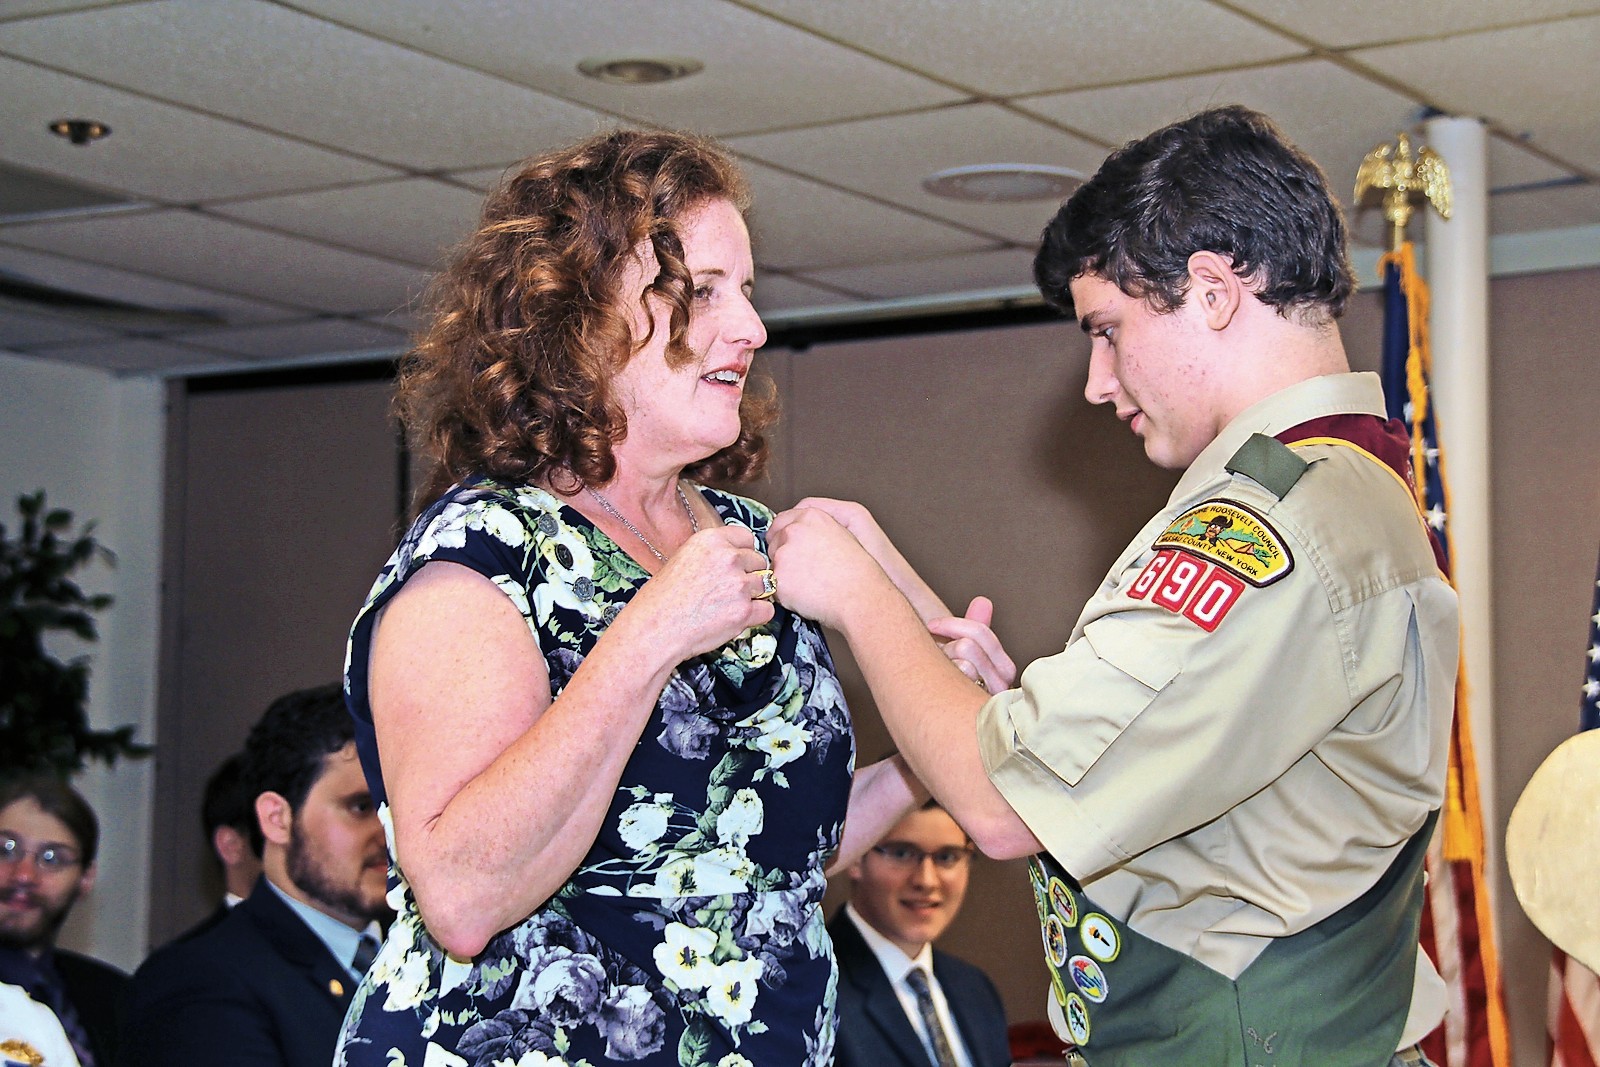 Eagle Scout Nathaniel Lettieri gave a pin to his mother.